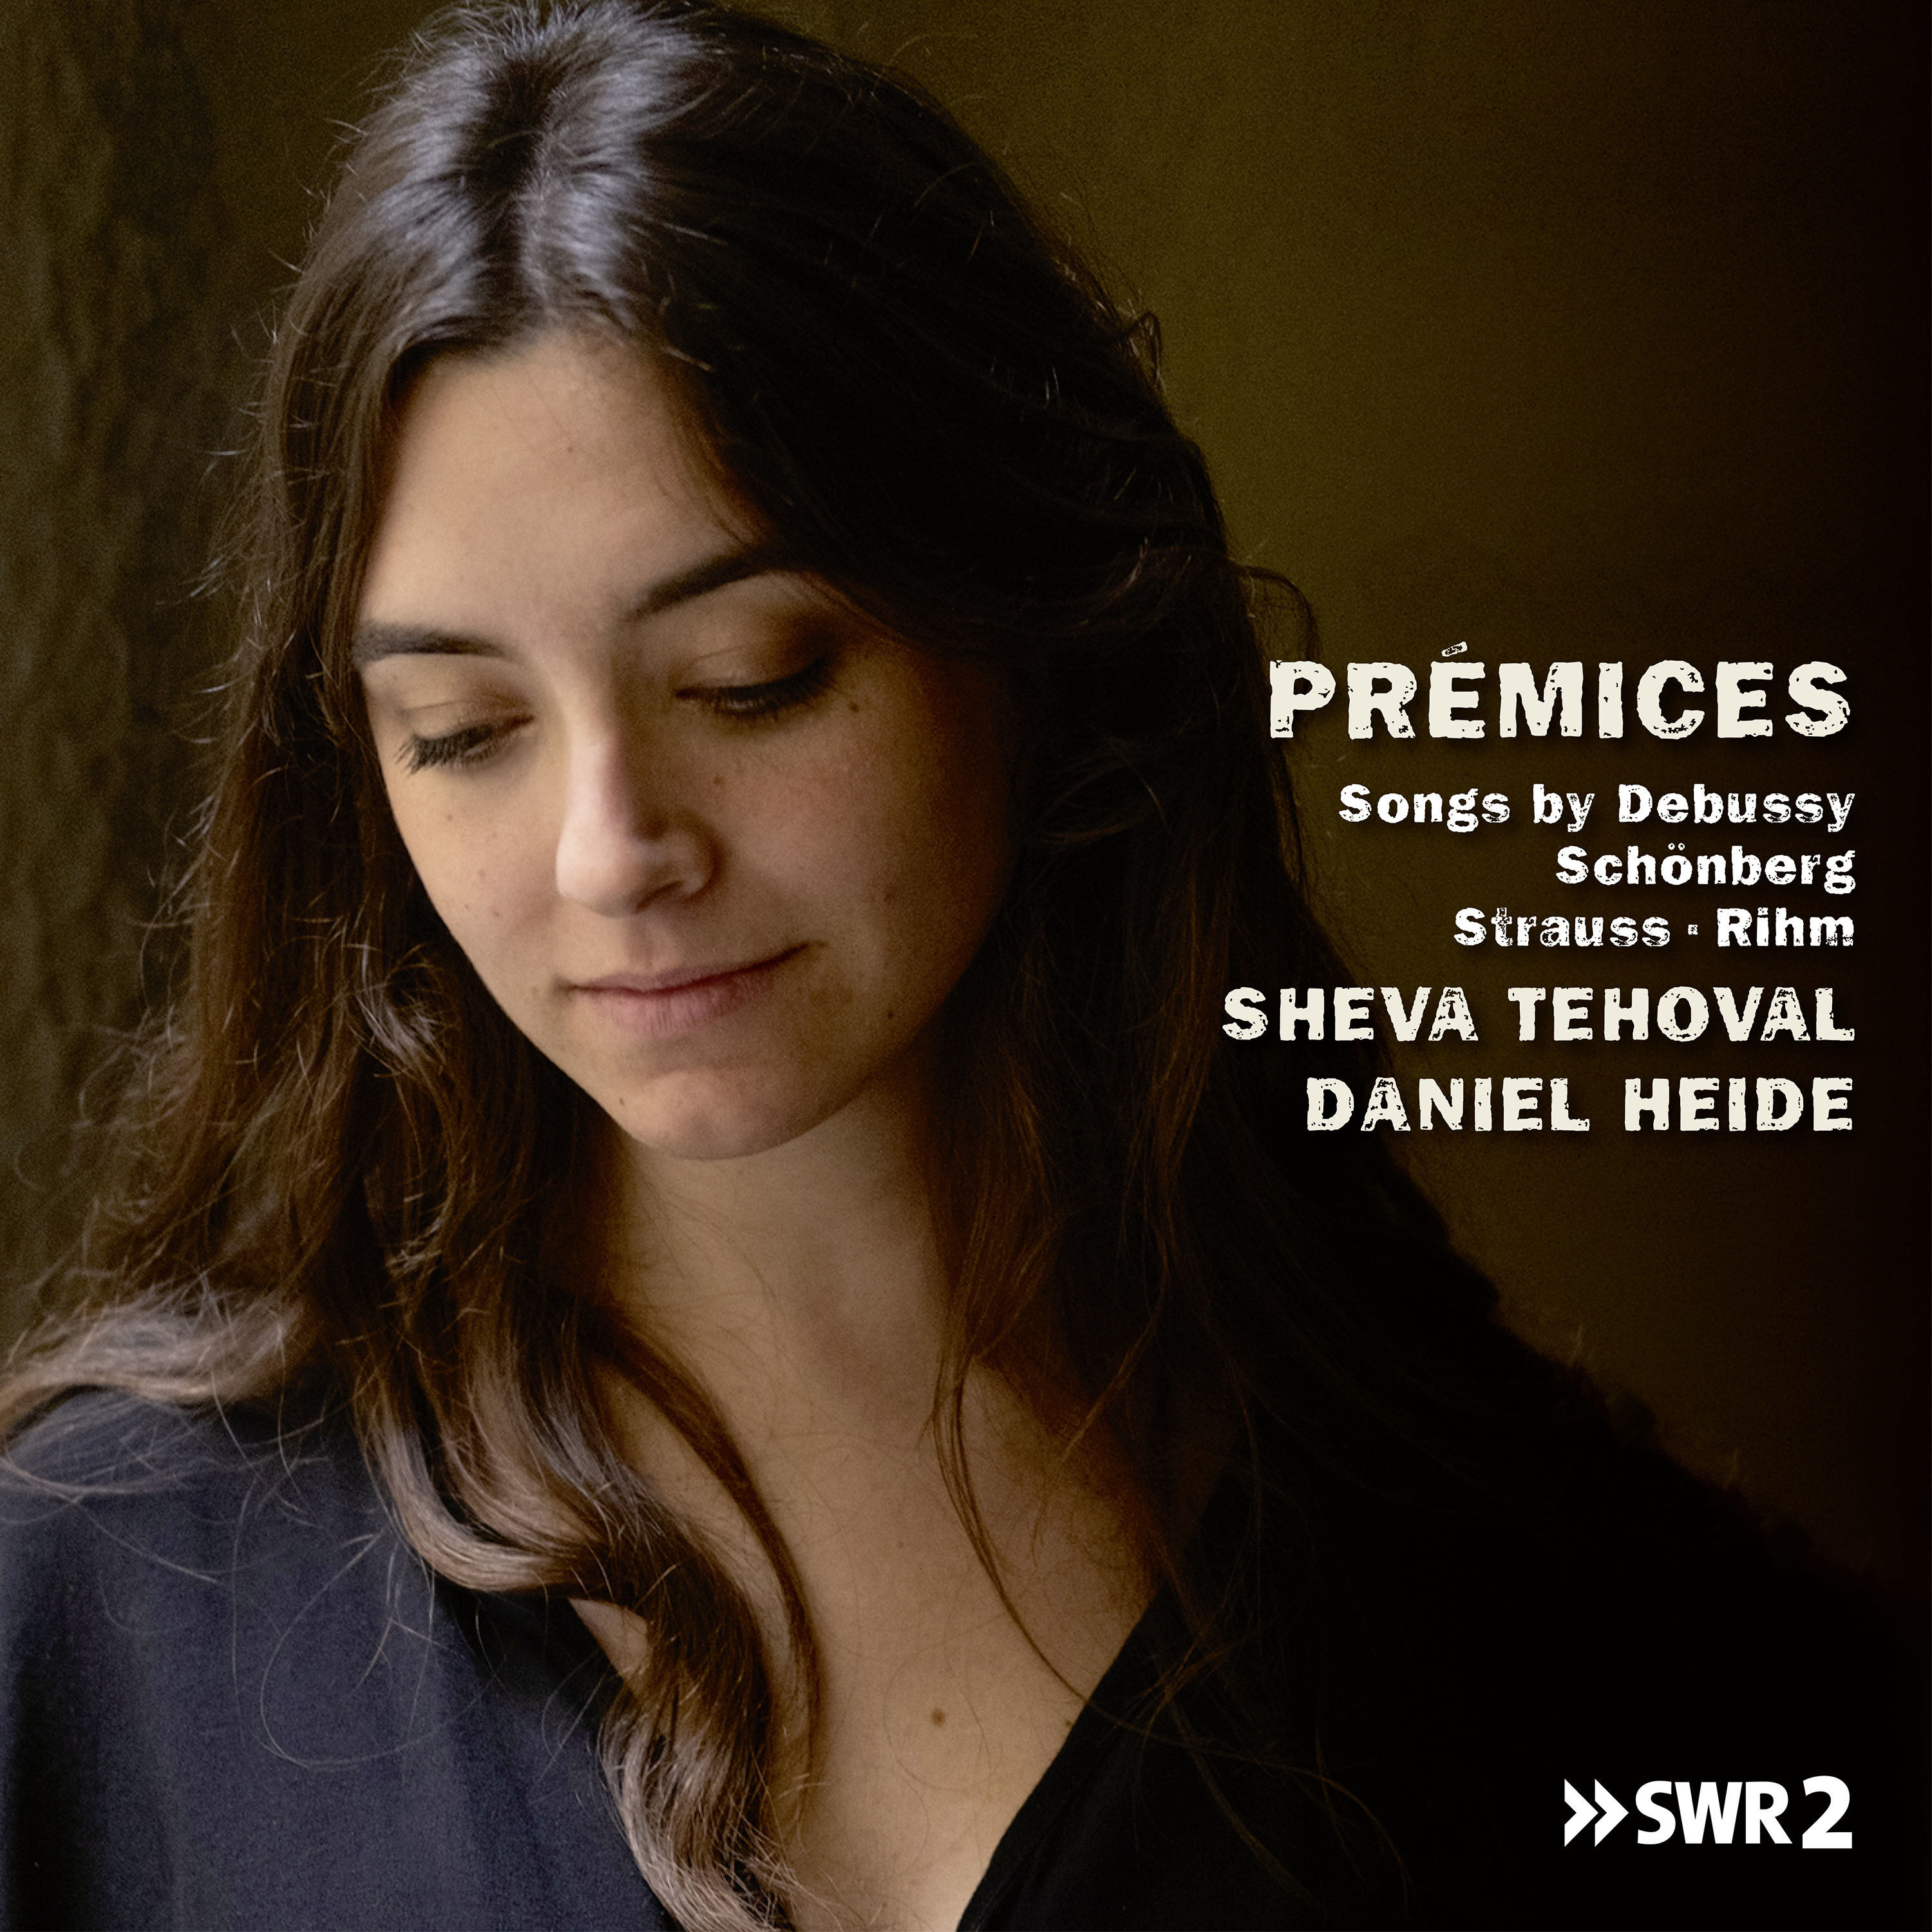 Sheva Tehoval – Premices, Songs by Debussy, Schonberg, Strauss and Rihm (2021) [FLAC 24bit/48kHz]